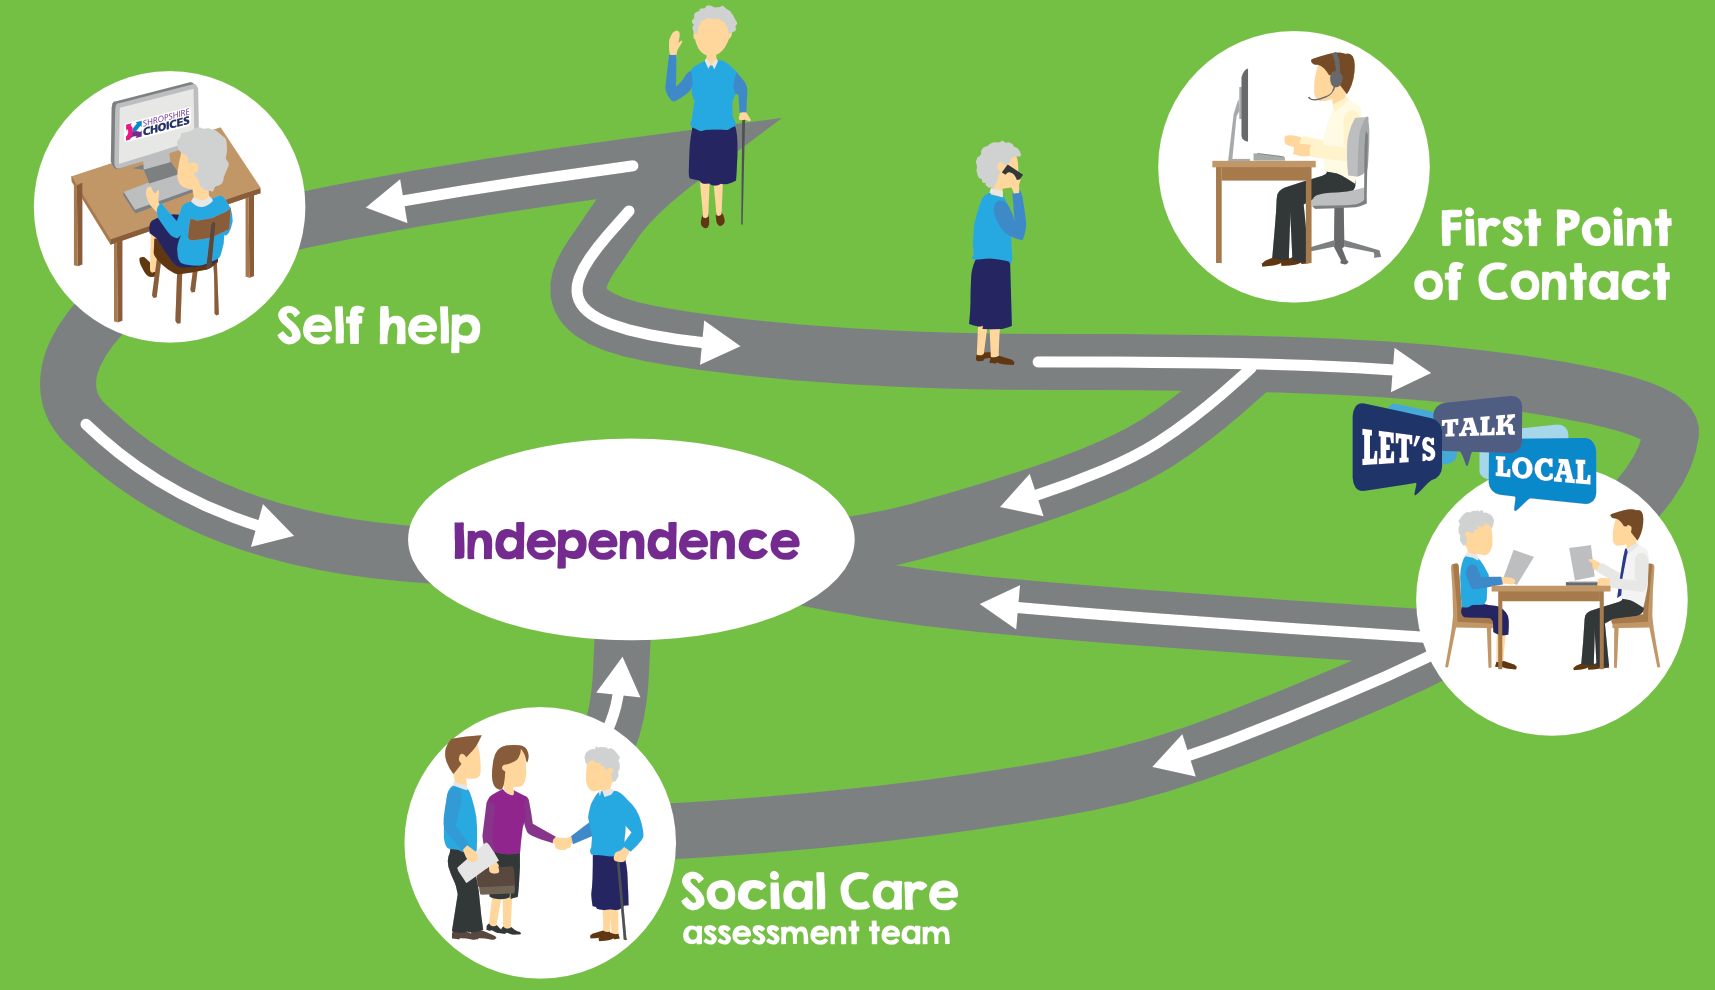 Visual representation of the journey to independence, and the ways Shropshire Choices can support it.